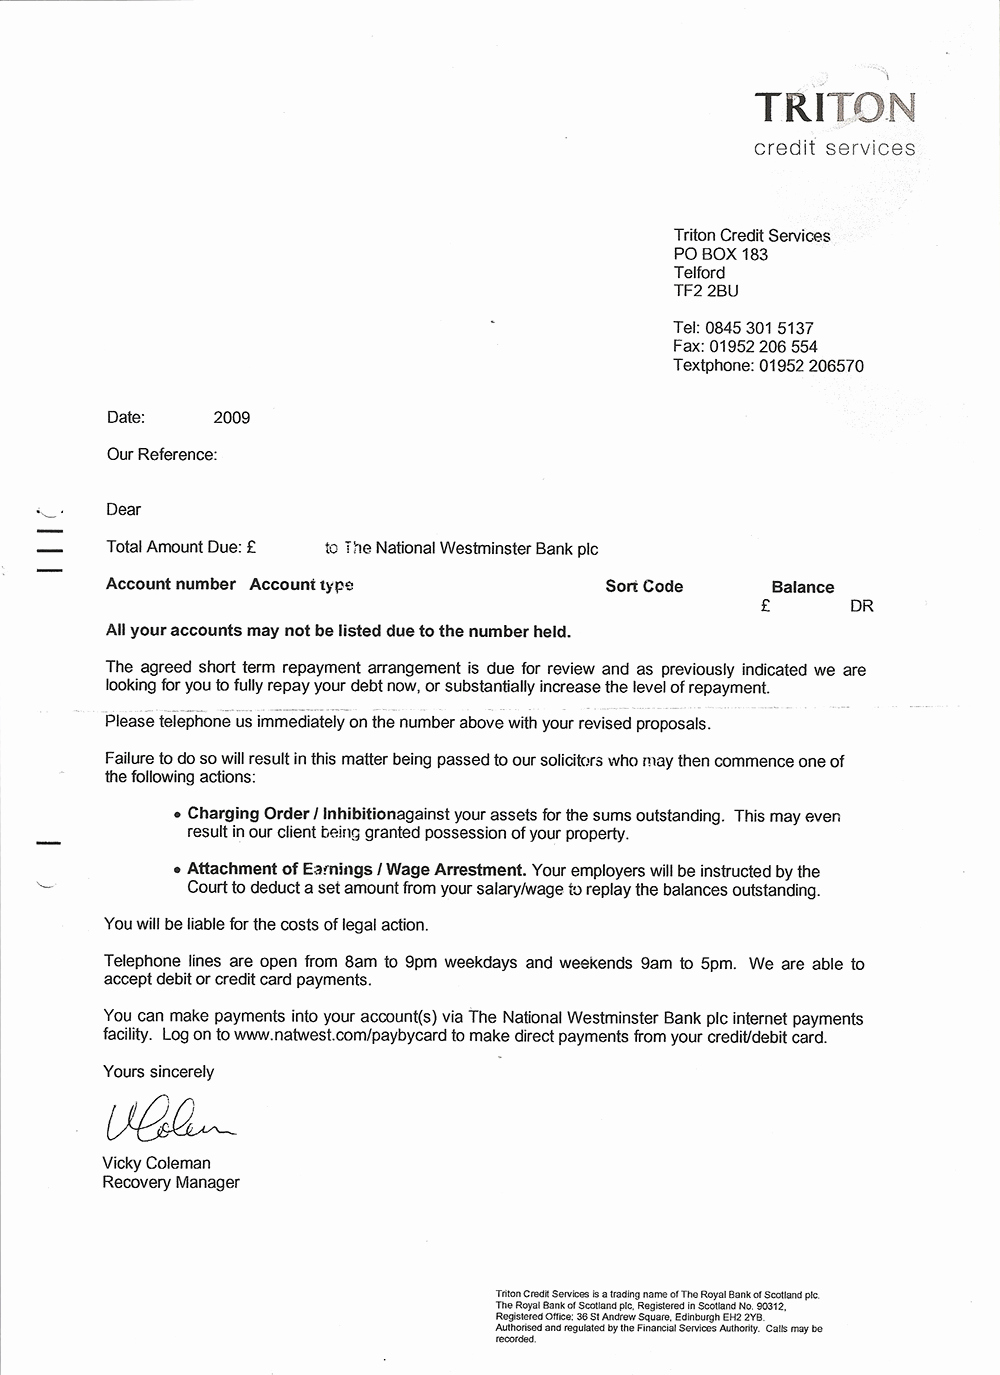 Fake Letter Of Recommendation Fresh Halifax Lloyds Tsb and Natwest S Fake Letters as Bad as